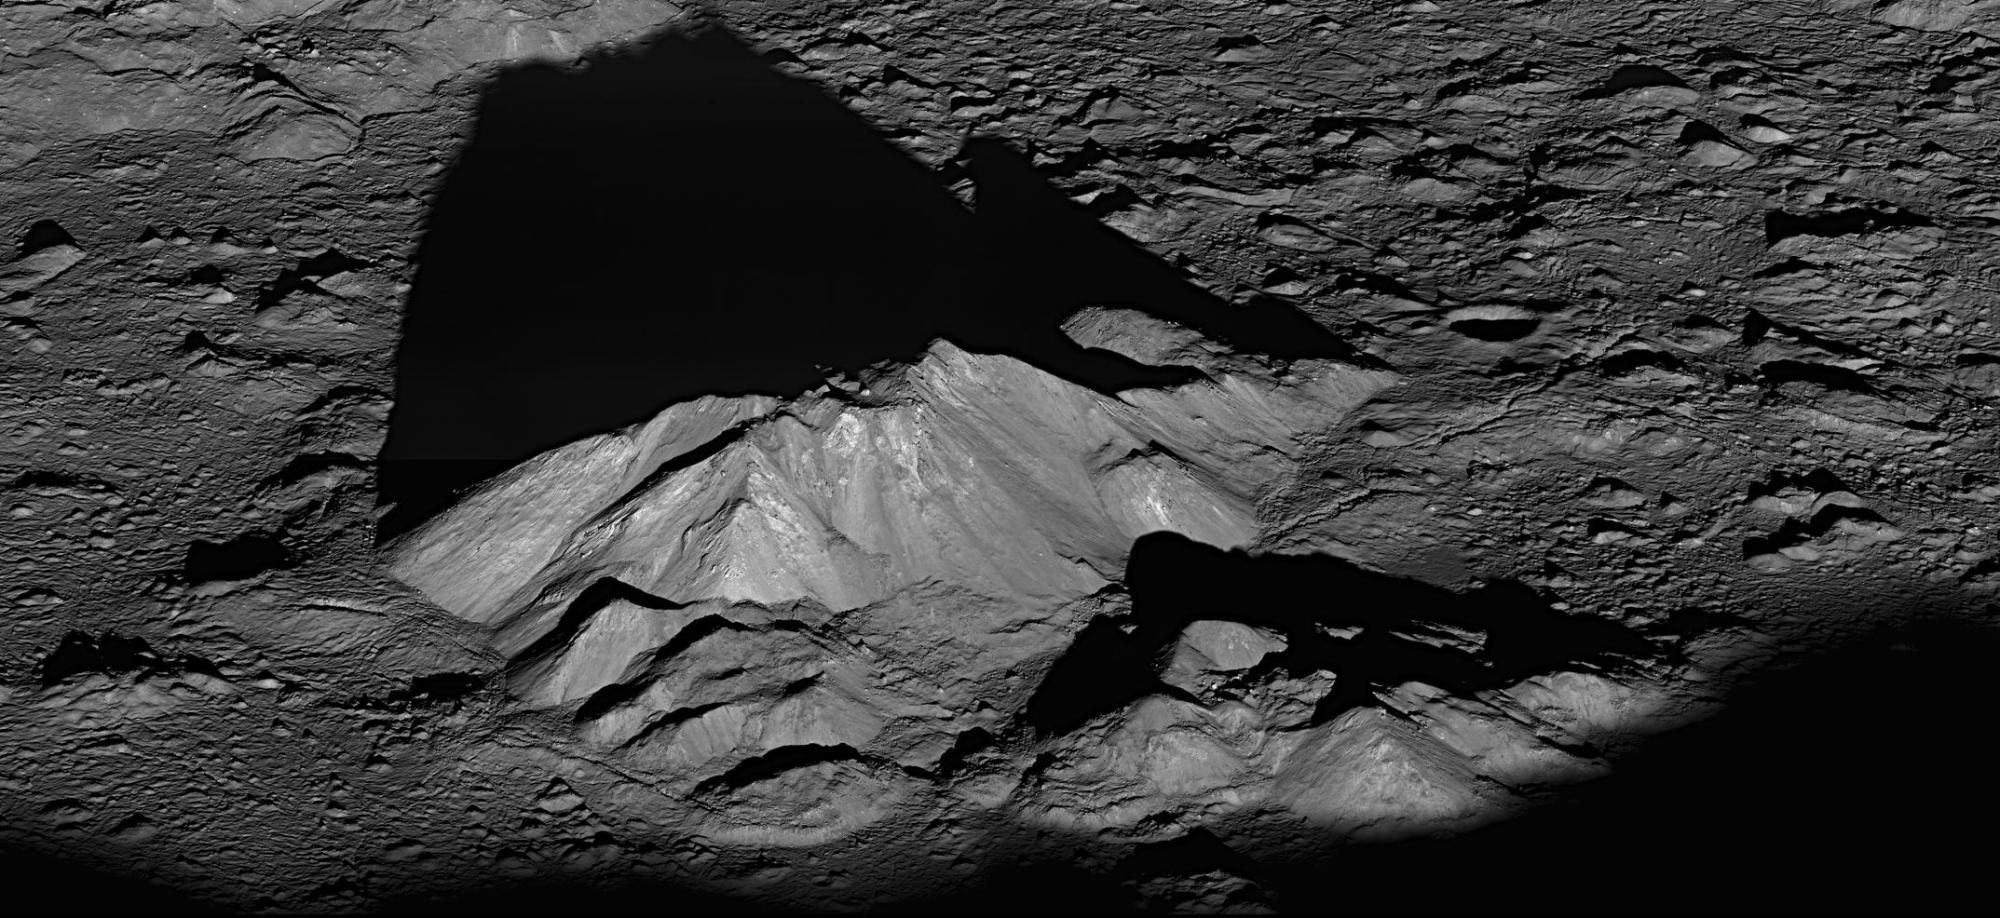 A mountain peak rises from the middle of lunar impact crater Tycho.